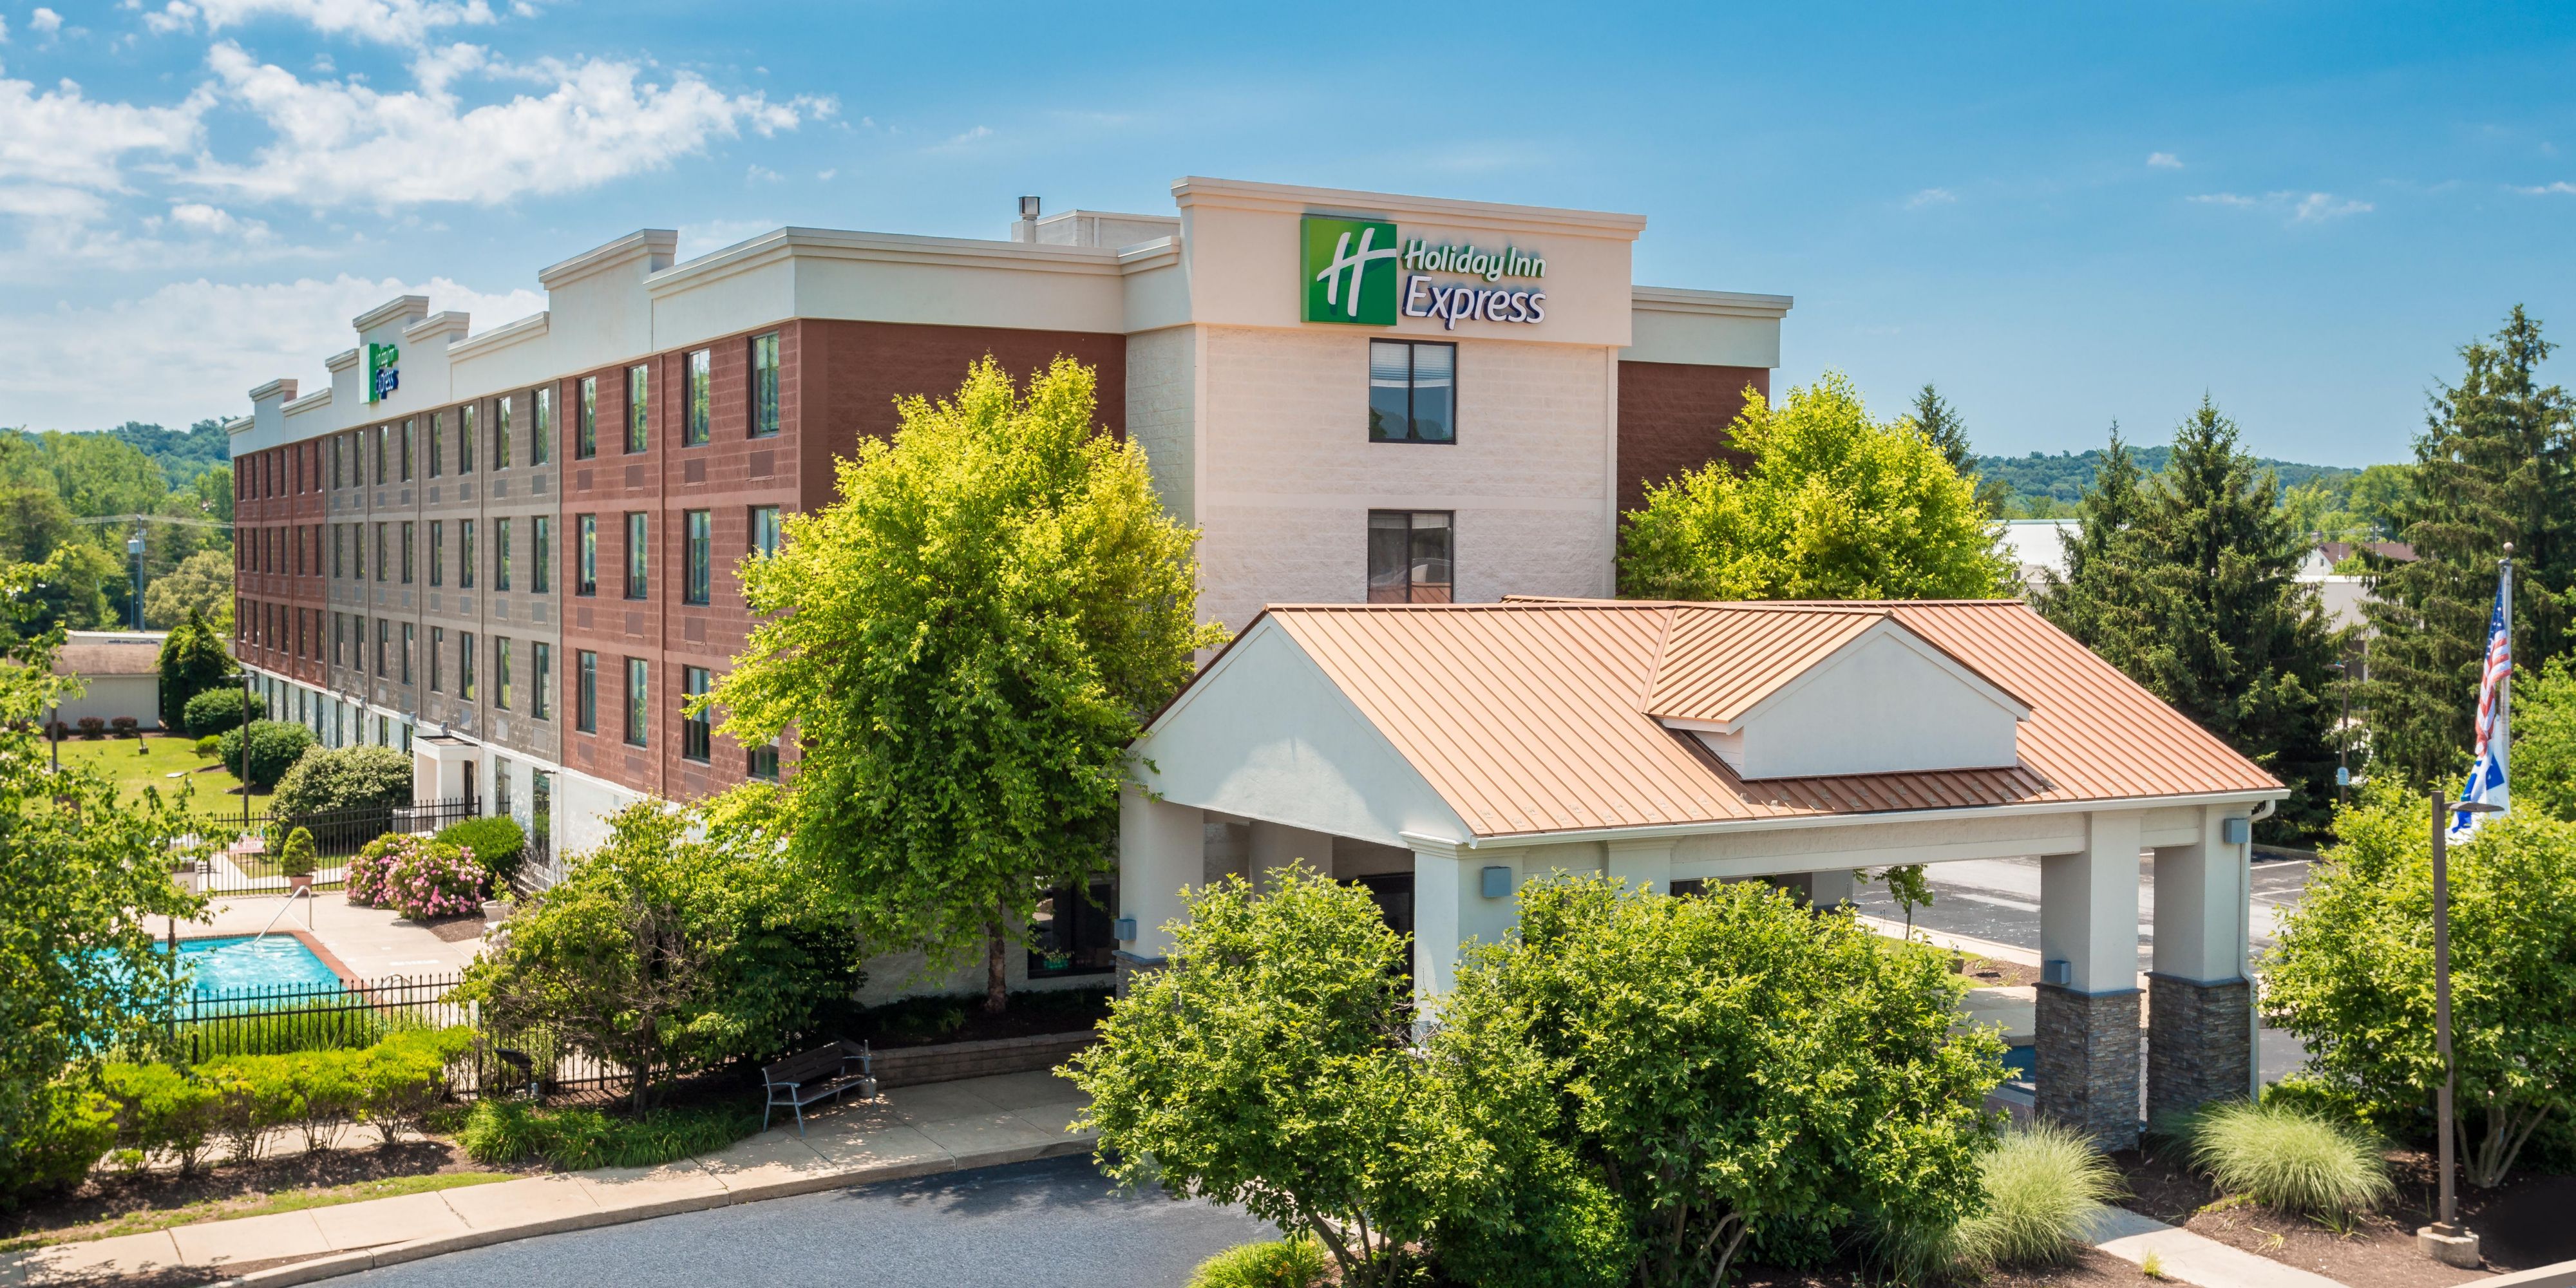 Looking for a convenient and comfortable stay in Exton, PA? Look no further than the Holiday Inn Express & Suites Exton! Our hotel is located just minutes away from a variety of delicious restaurants, including the Pour House, and is also close to popular shopping destinations like the Exton Square Mall and Whole Foods Market. Book today!